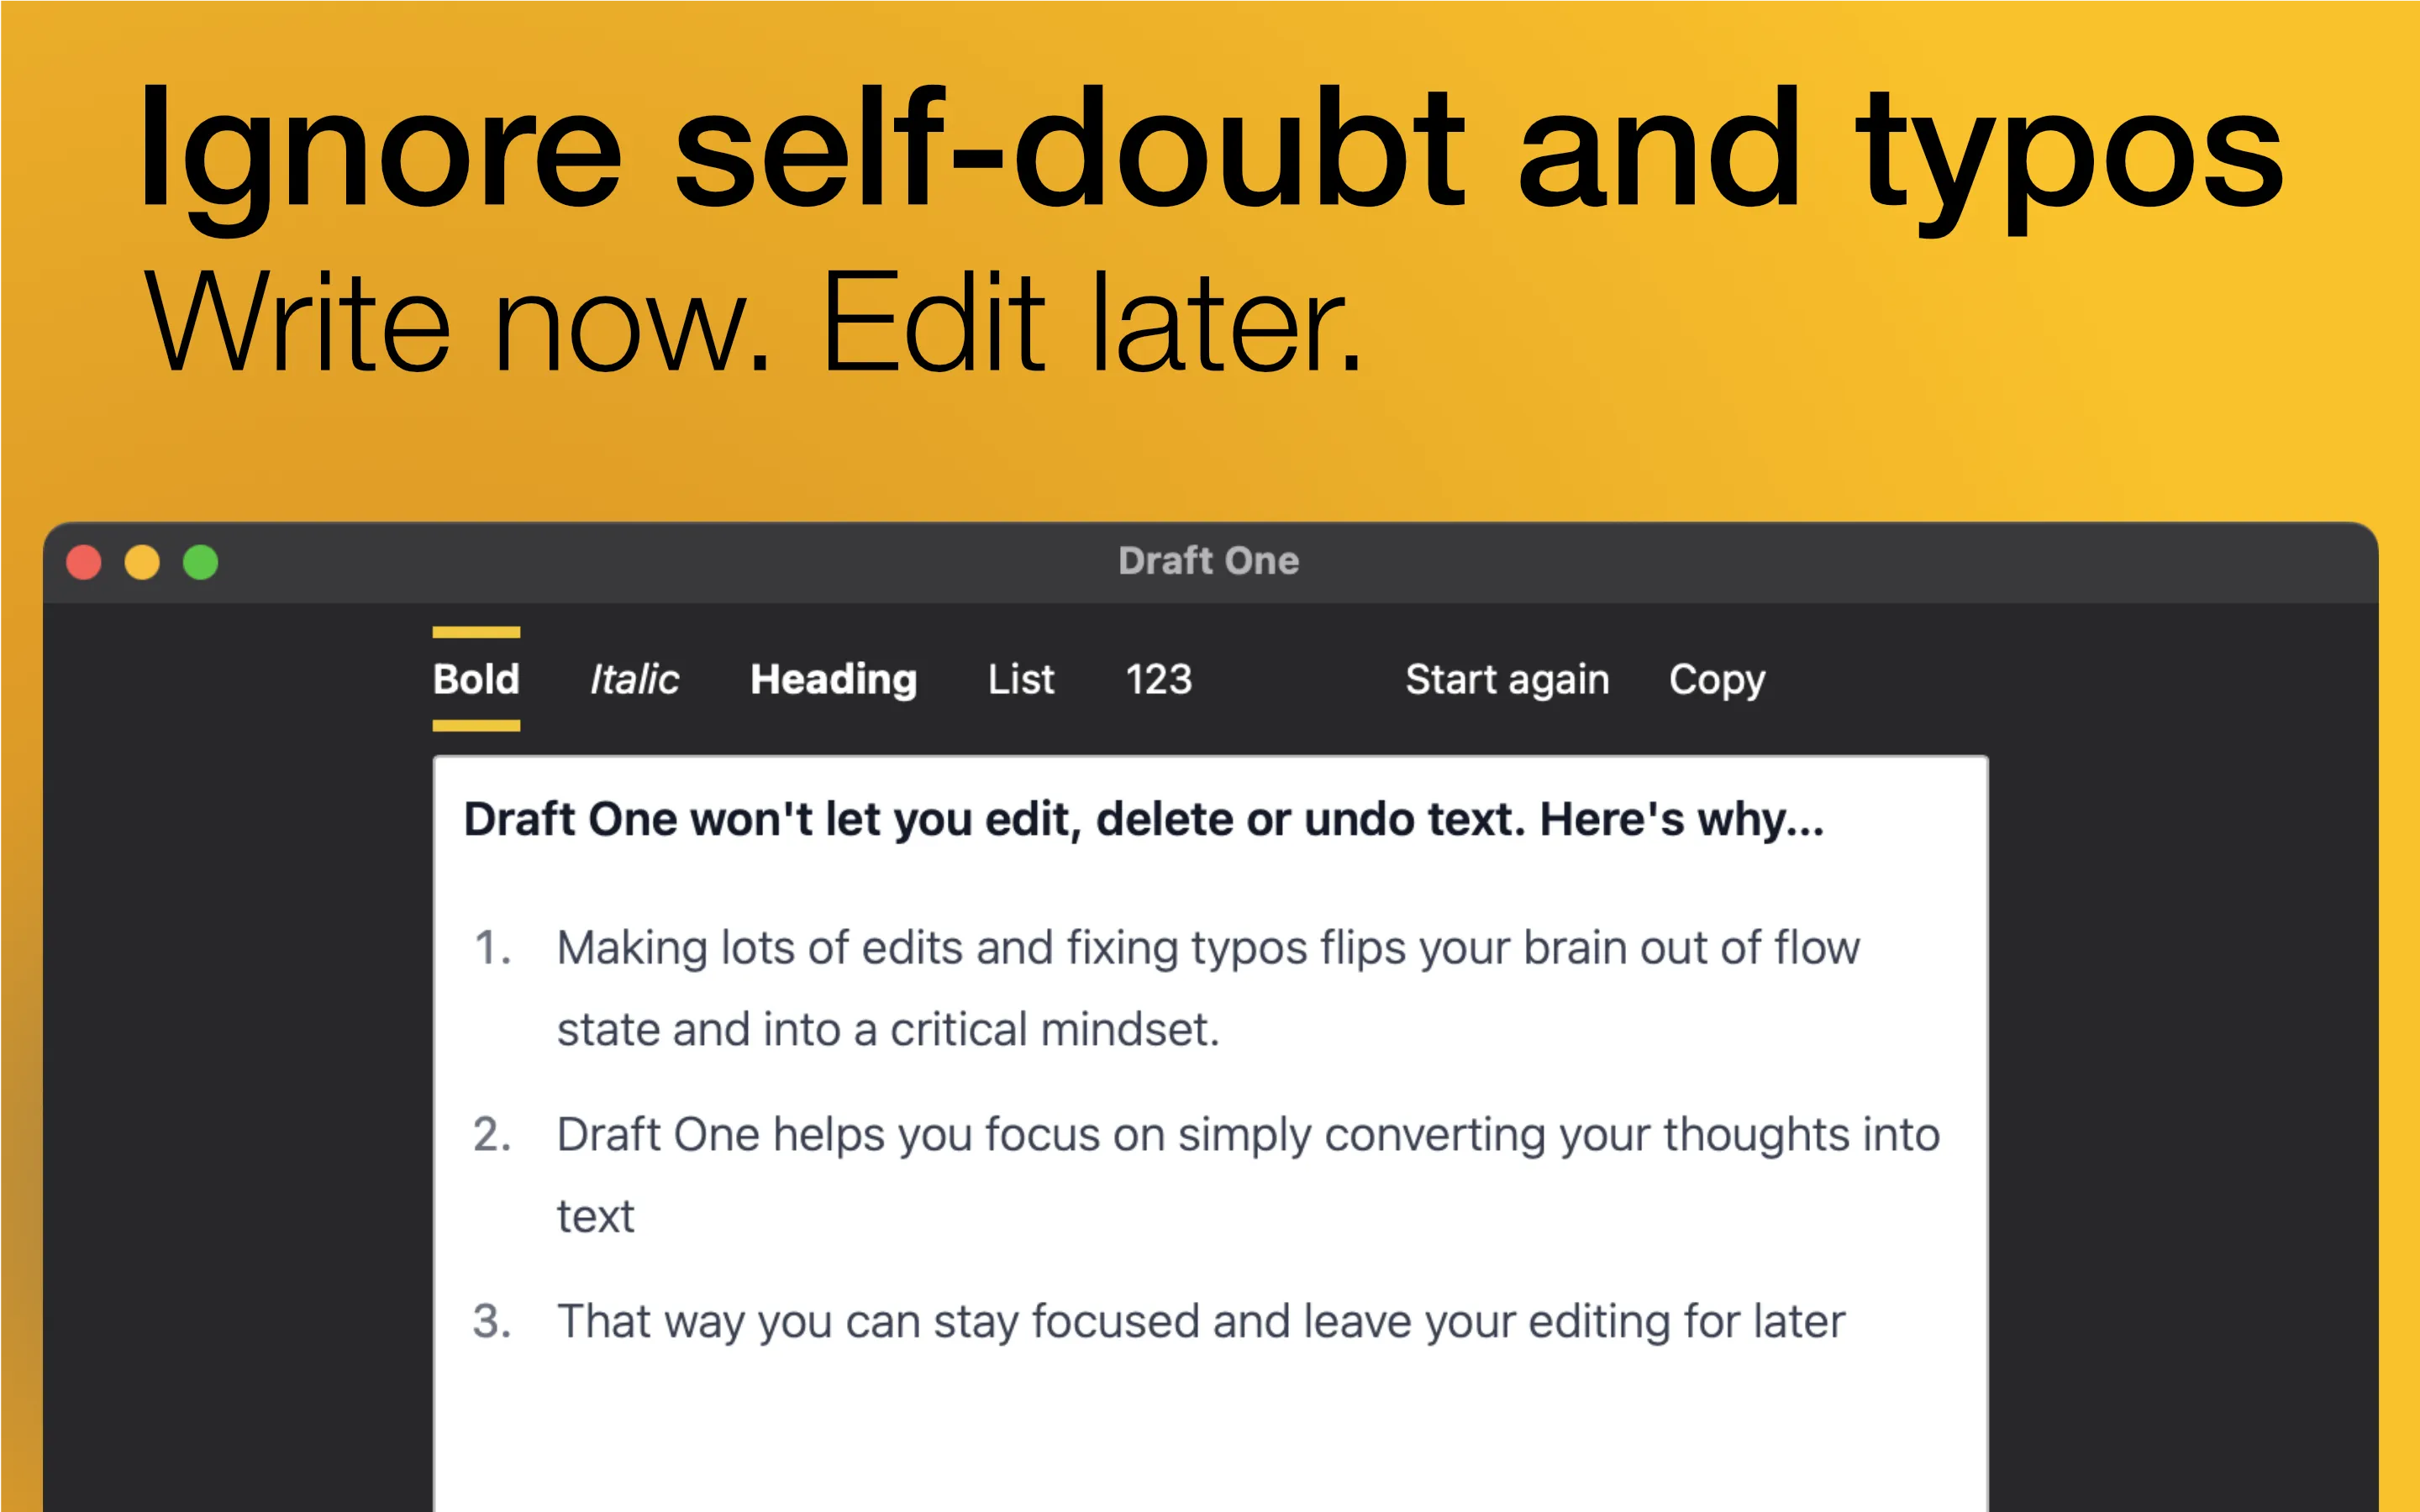 A screenshot of Draft One with the words &#x27;Ignore self-doubt and typos. Write now. Edit later.&#x27; above it. The editor contains the text &#x27;Draft One won&#x27;t let you edit, delete or undo text. Here&#x27;s why...1. Making lots of edits and fixing typos flips your brain out of flow state and into a critical mindset. 2. Draft One helps you focus on simply converting your thoughts into text. 3. That way you can stay focused and leave your editing for later&#x27;